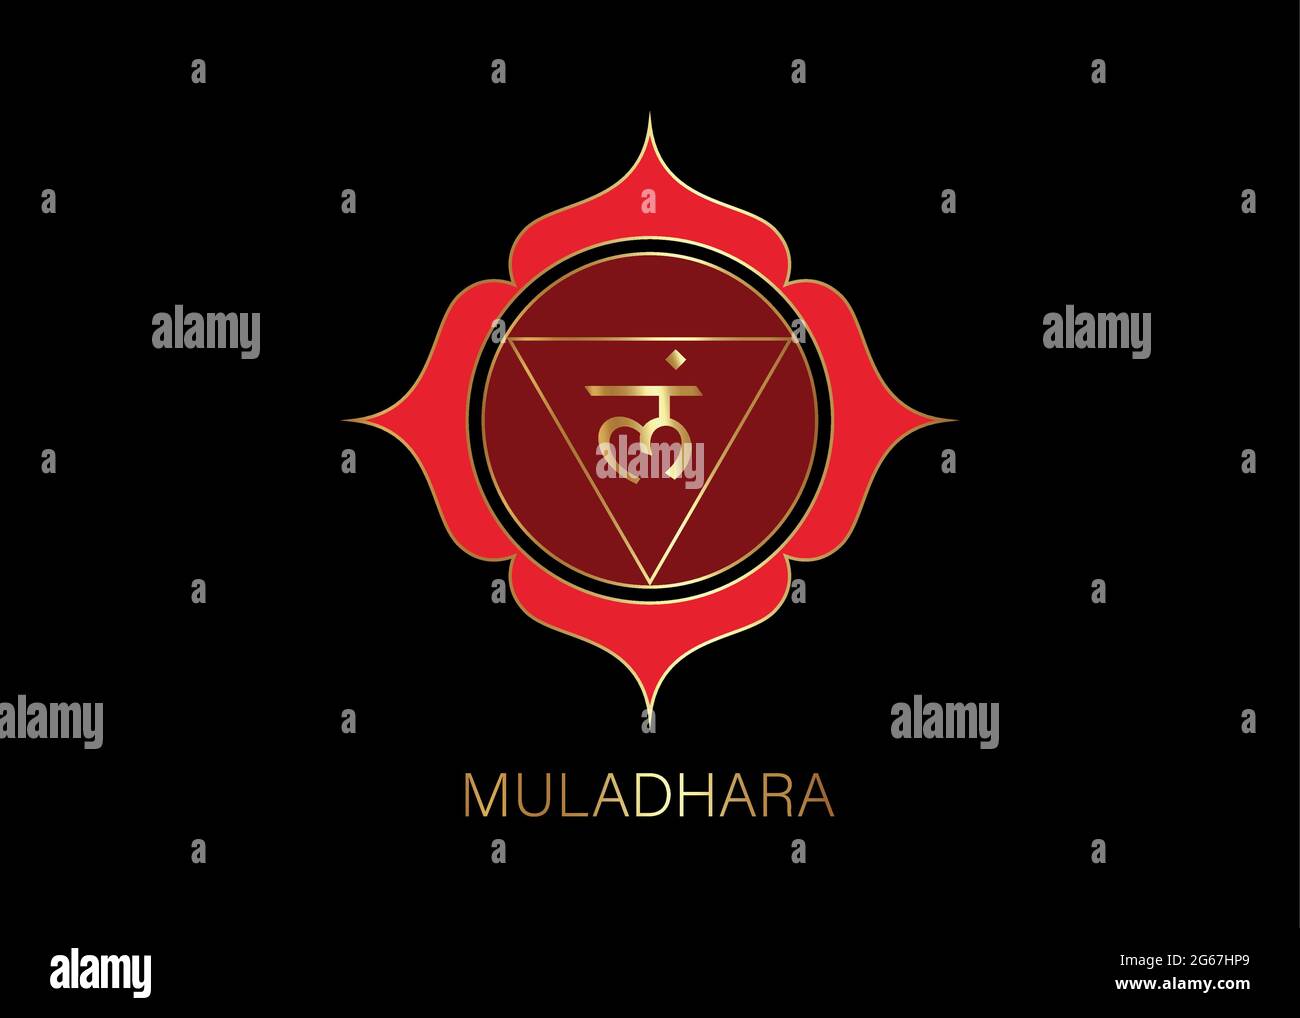 Muladhara chakra logo template. First root chakra symbol. Red and Gold sacral sign meditation, yoga mandala icon vector isolated on black background Stock Vector